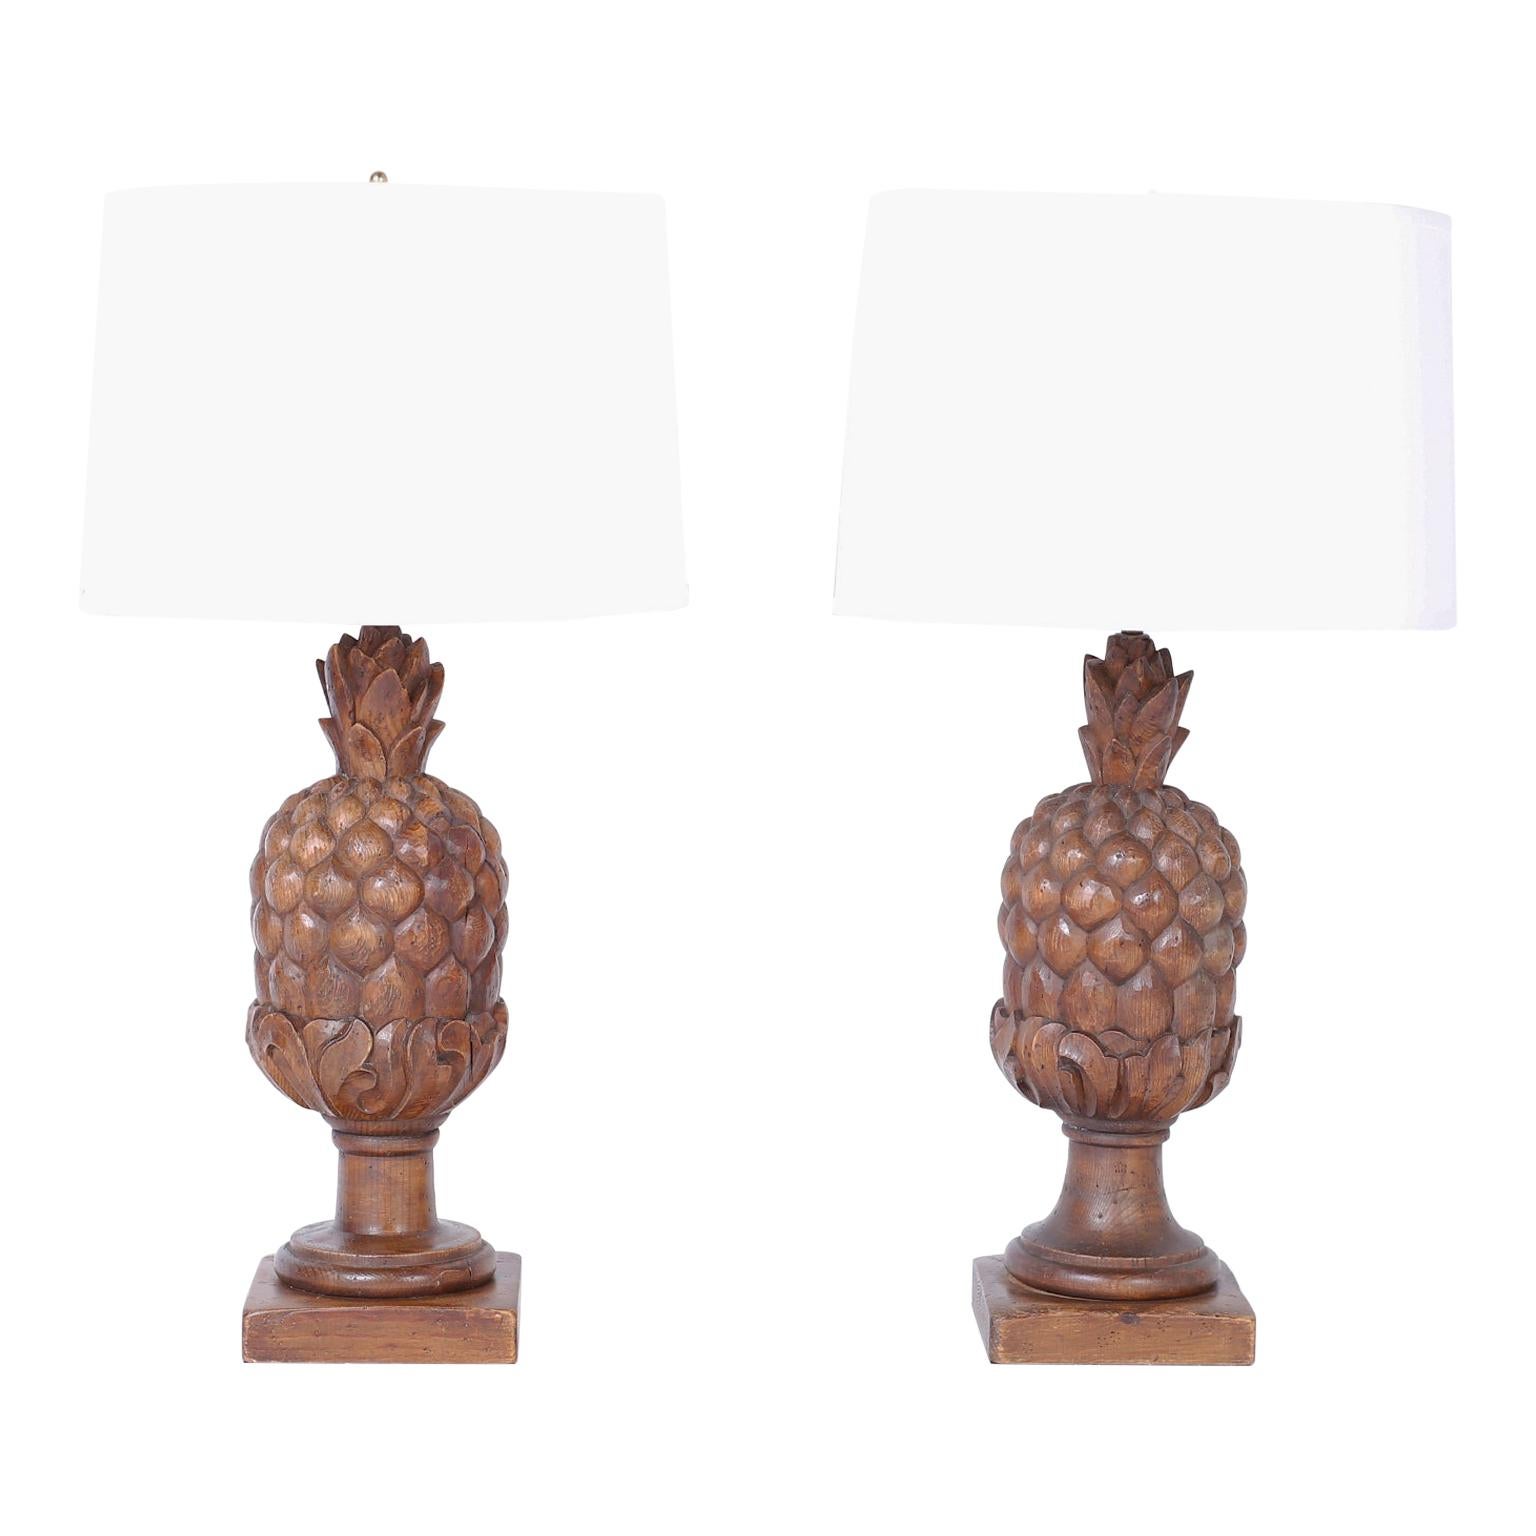 Pair of Carved Wood Pineapple Table Lamps